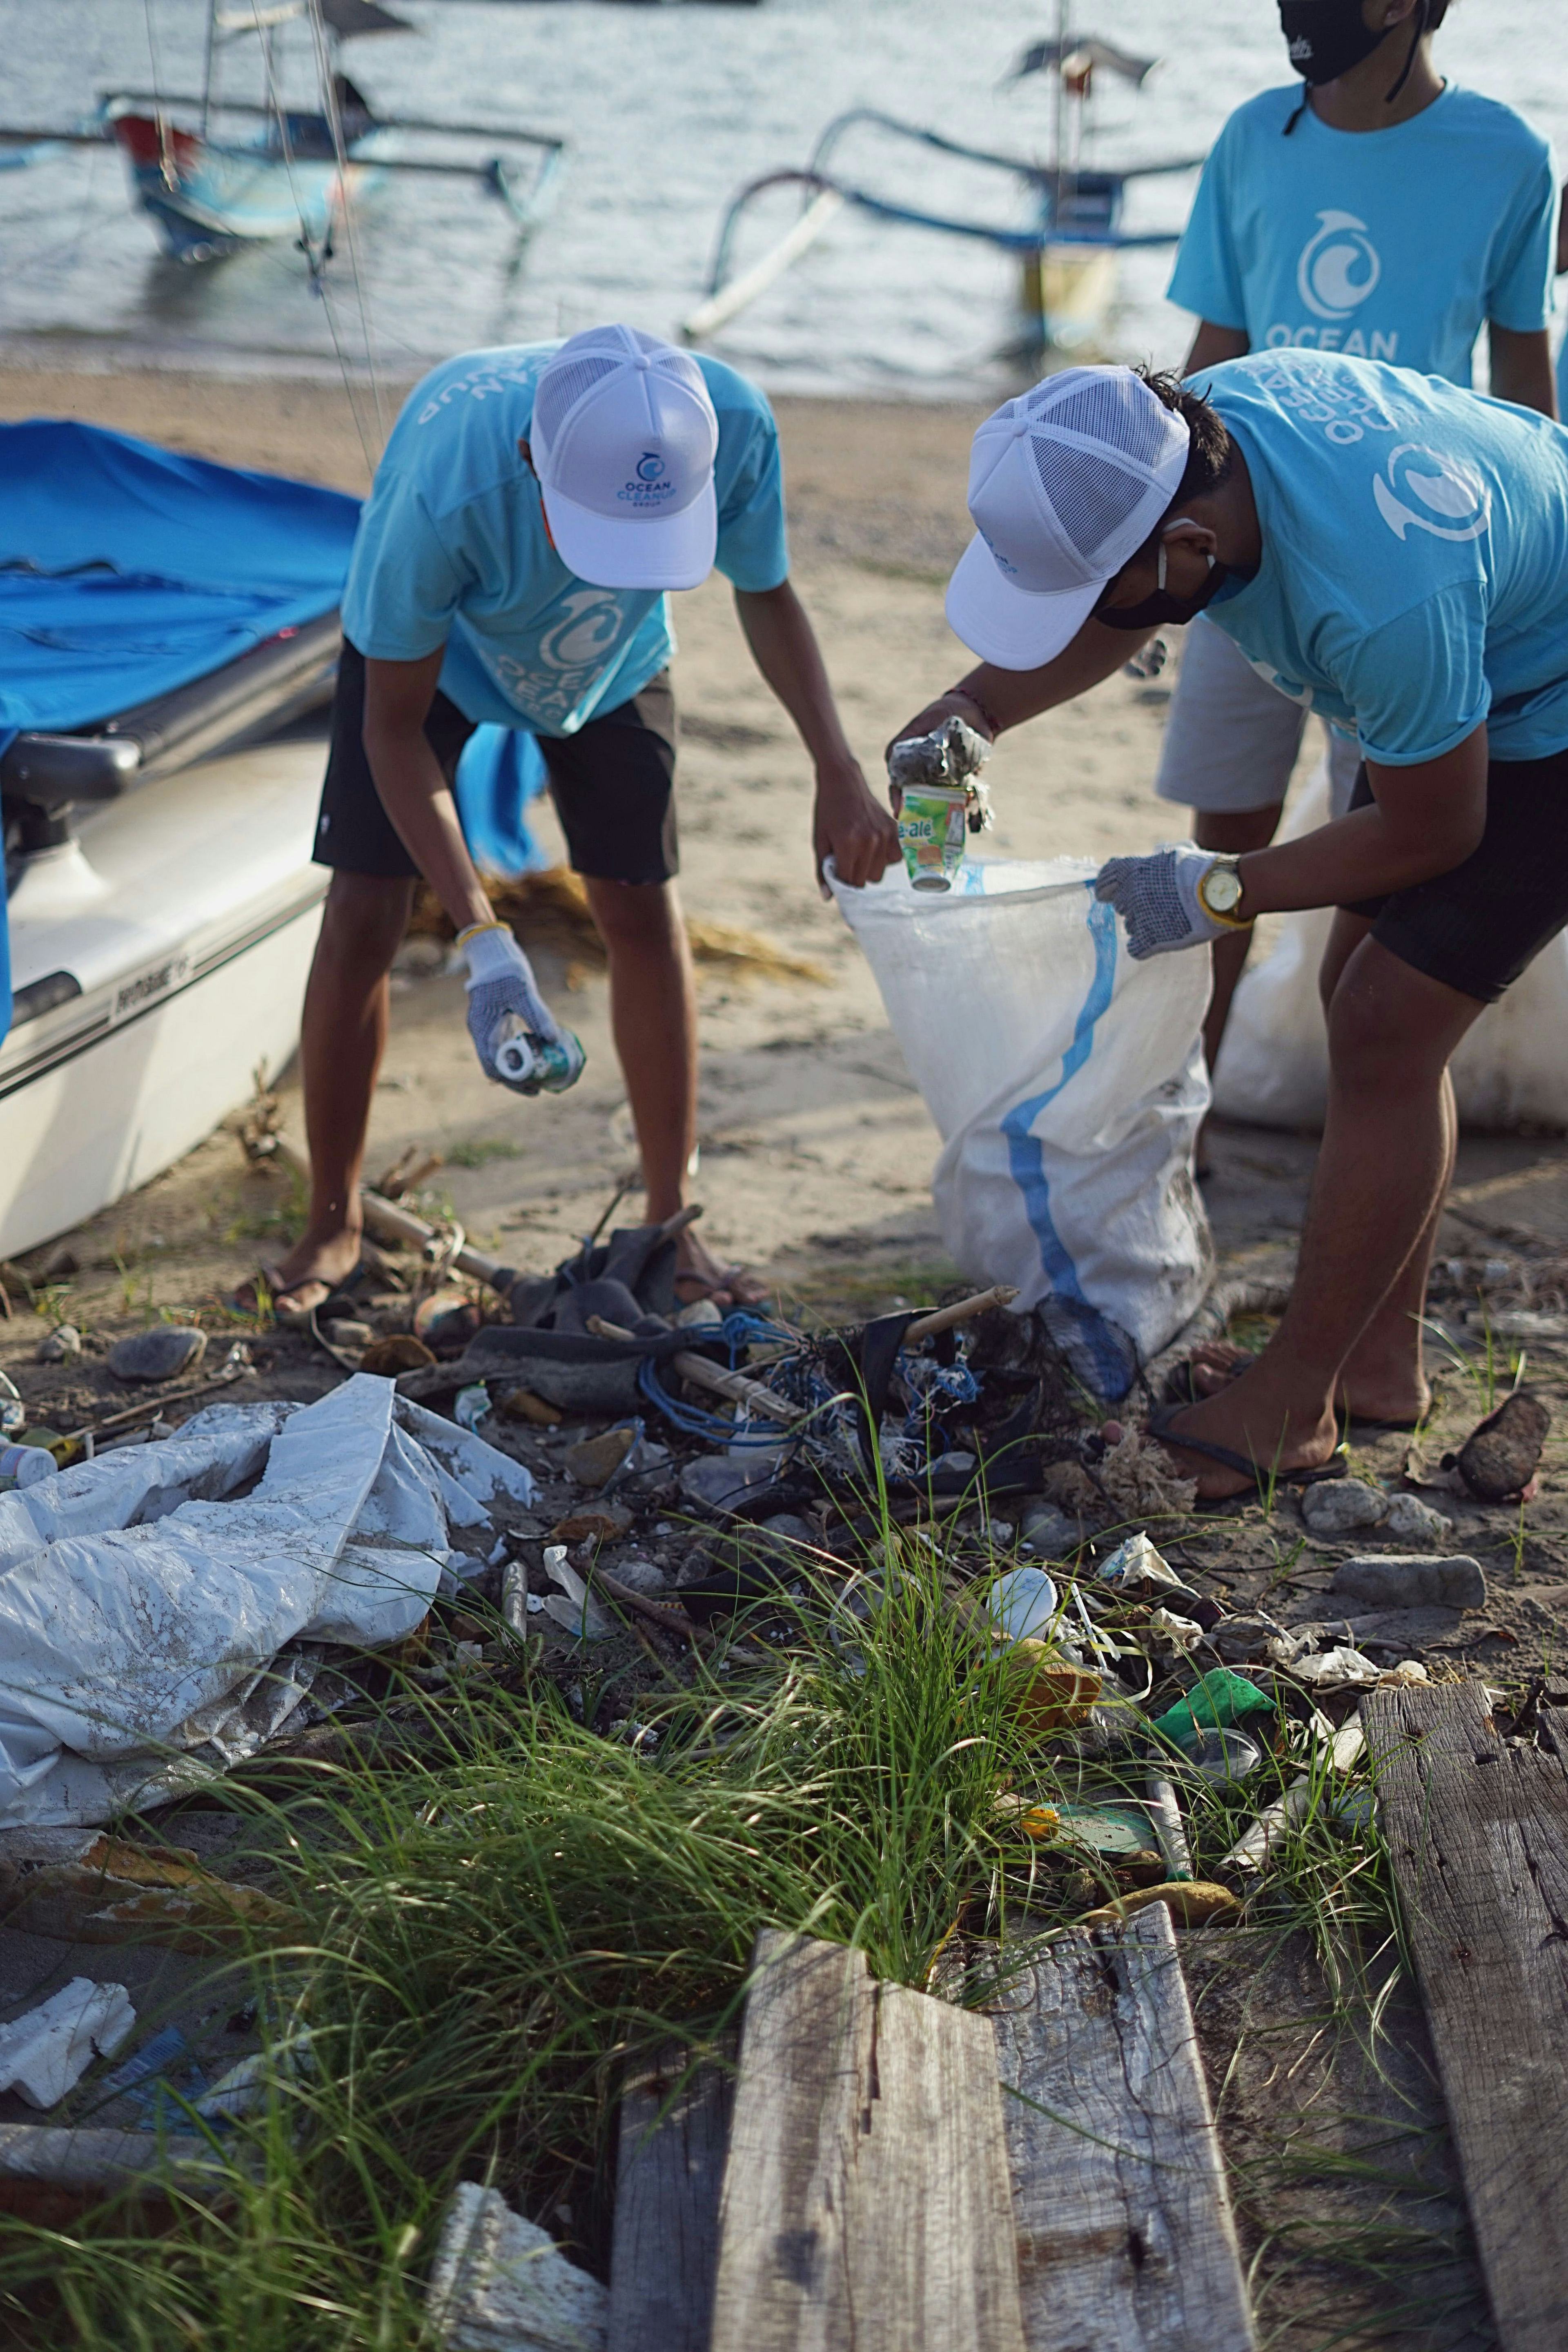 people dressed in blue shirts and black shorts with a plastic bag doing a trash cleanup of a sandy beach